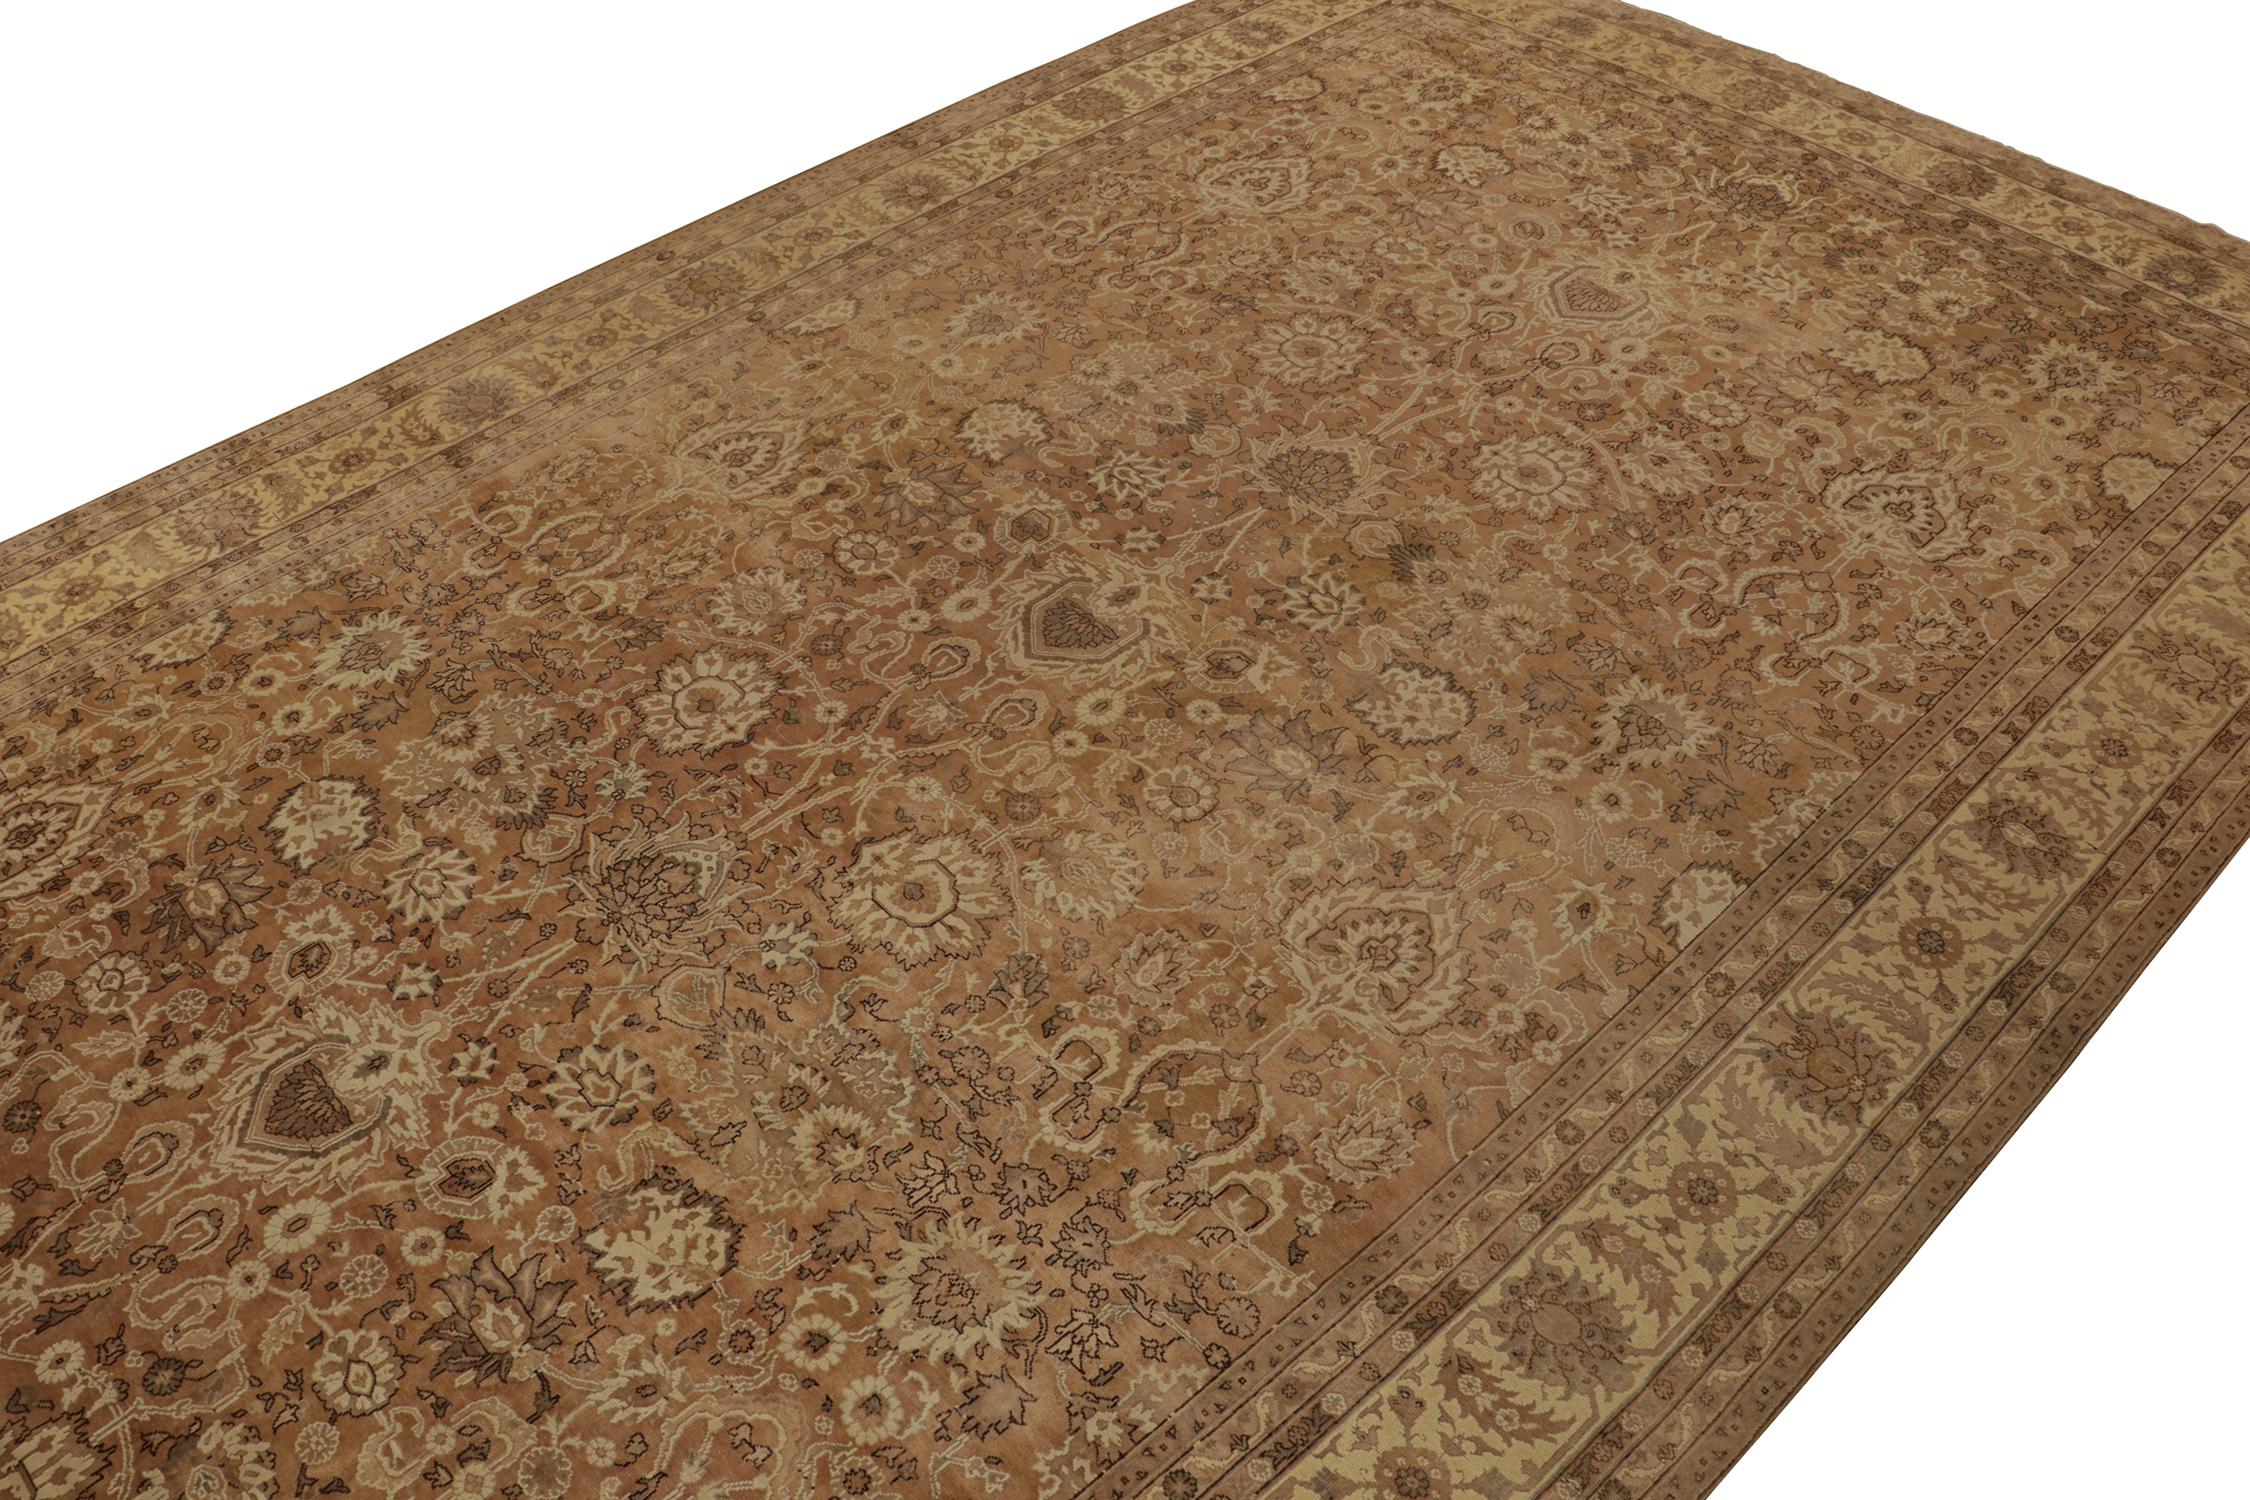 Modern Antique Persian Rug in Beige-Brown and Gold Floral Patterns by Rug & Kilim For Sale